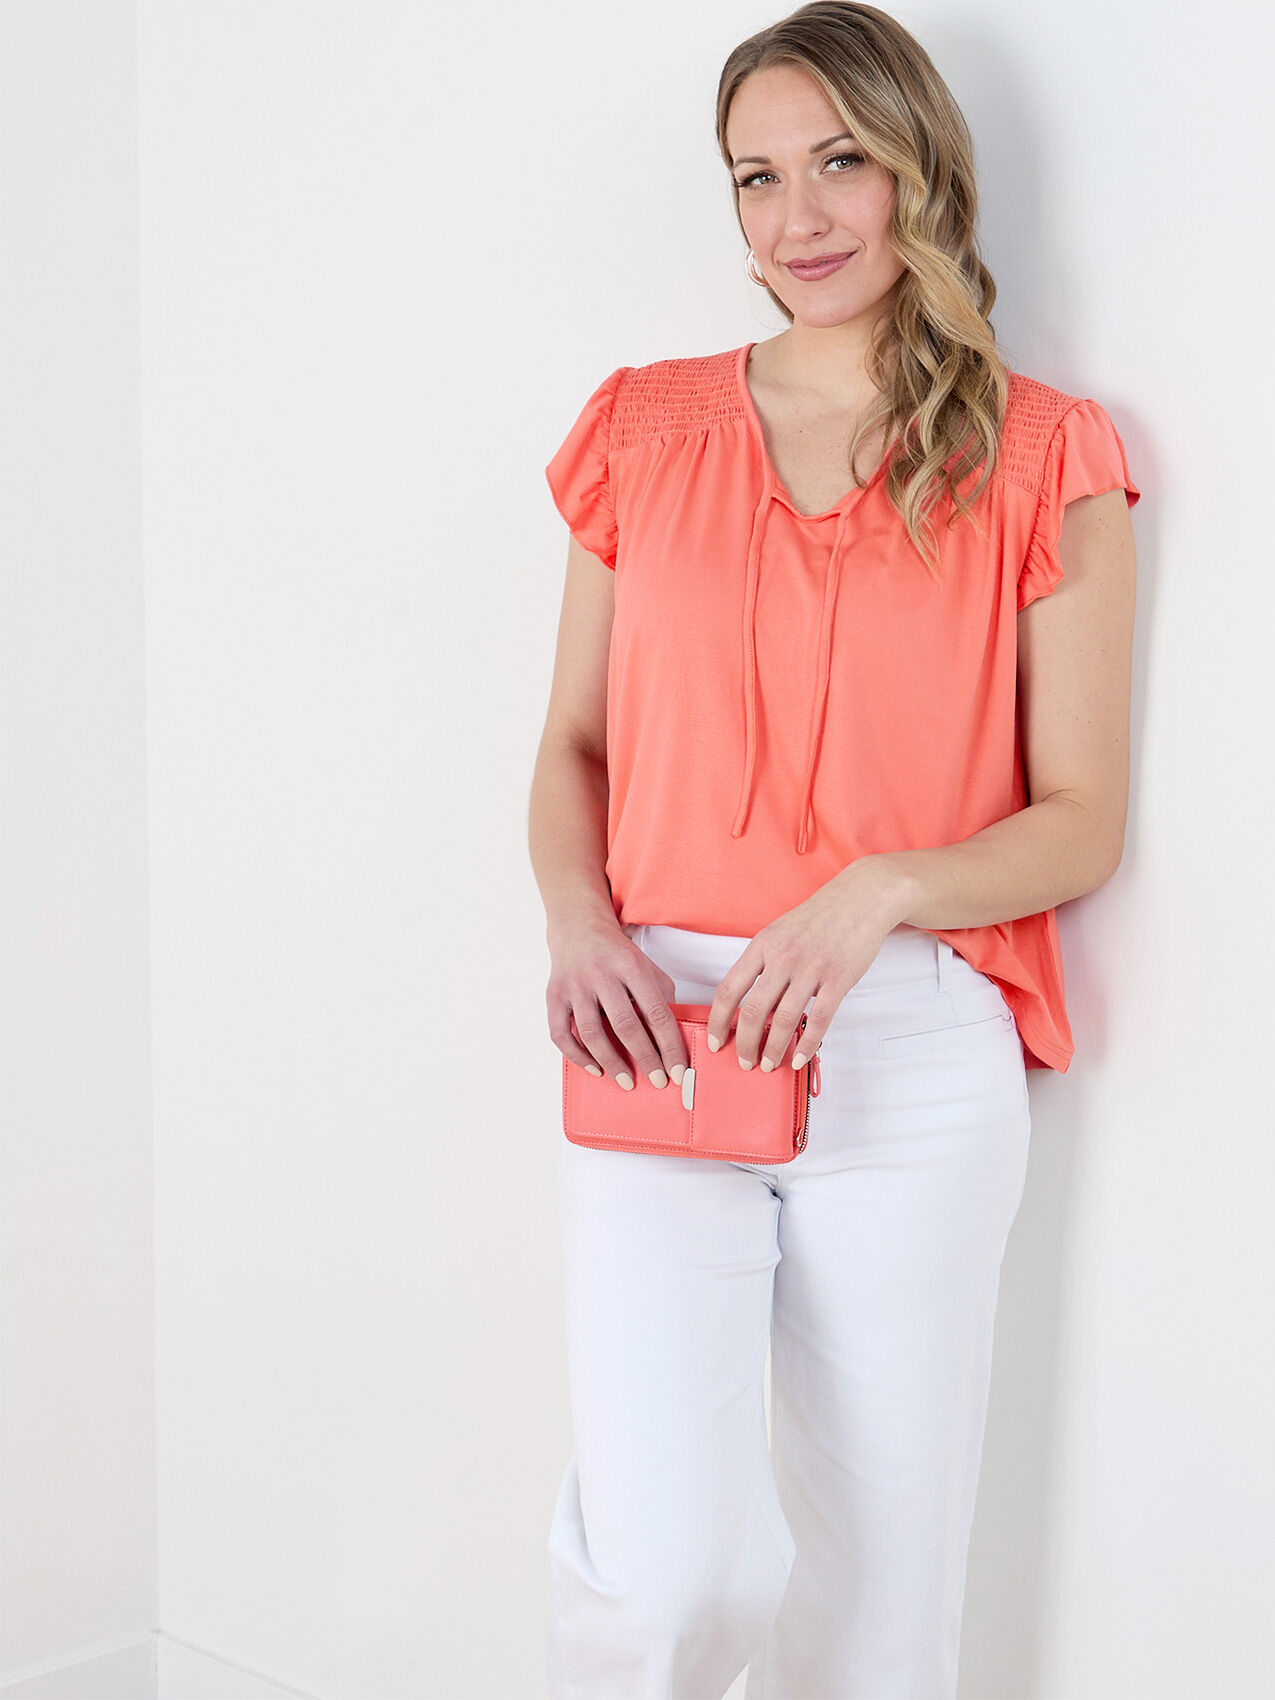 Short Sleeve V-Neck with Flutter Sleeves by GG Collection